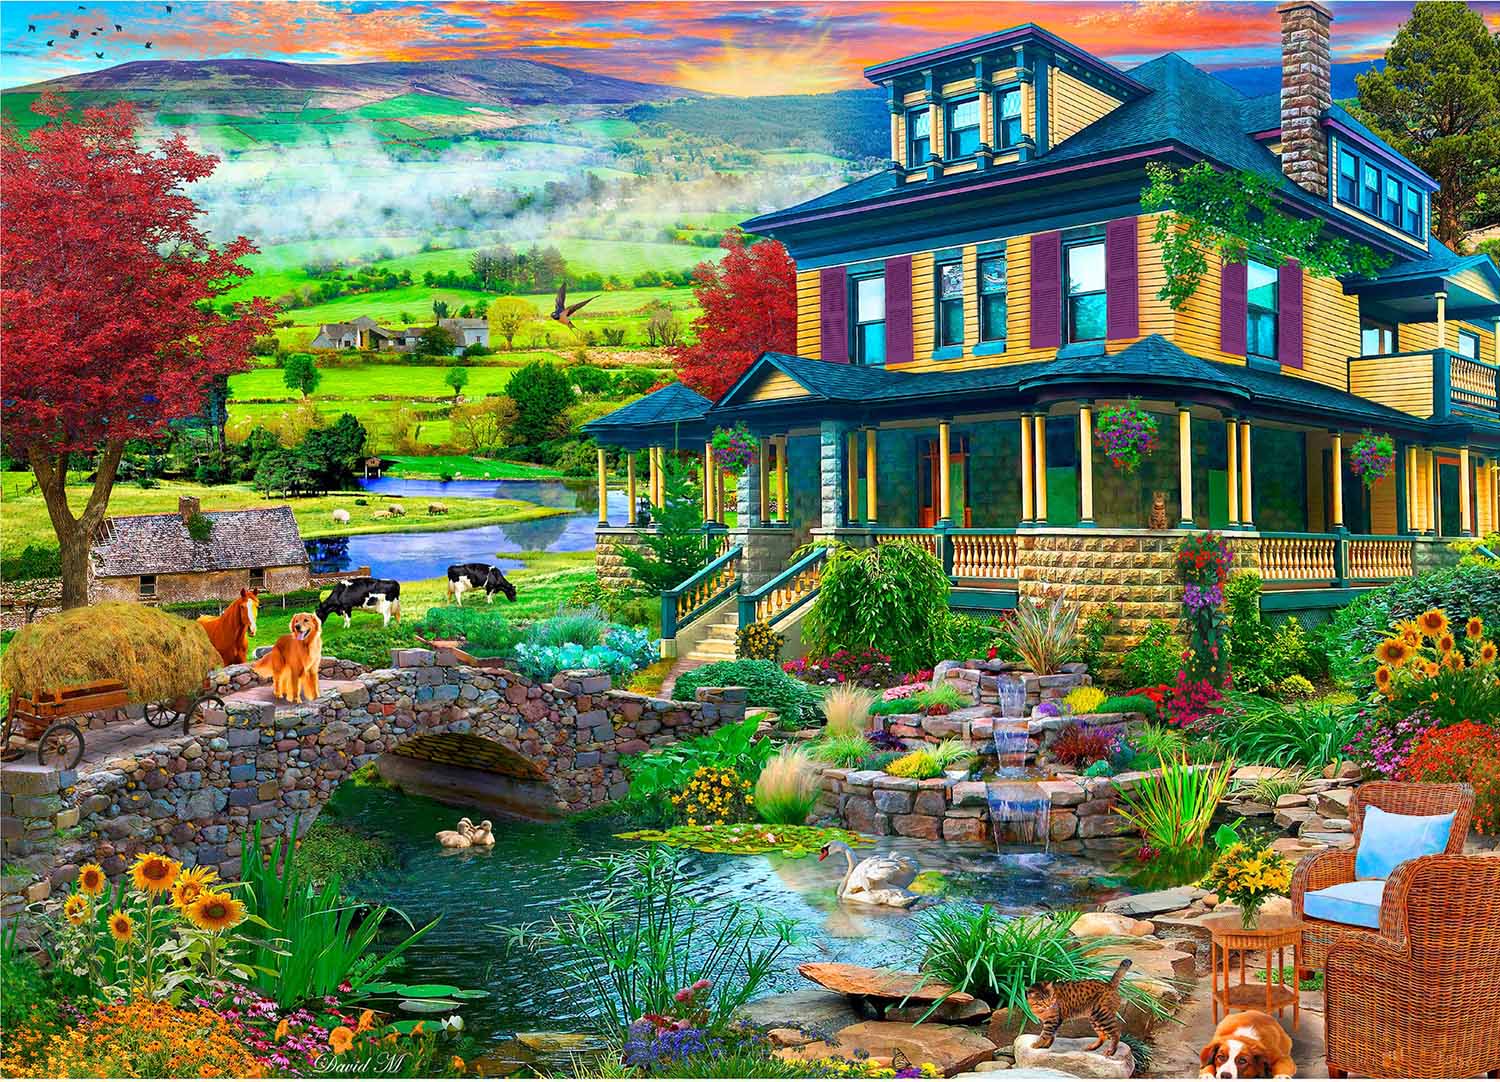 Grandma's Country House Landscape Jigsaw Puzzle